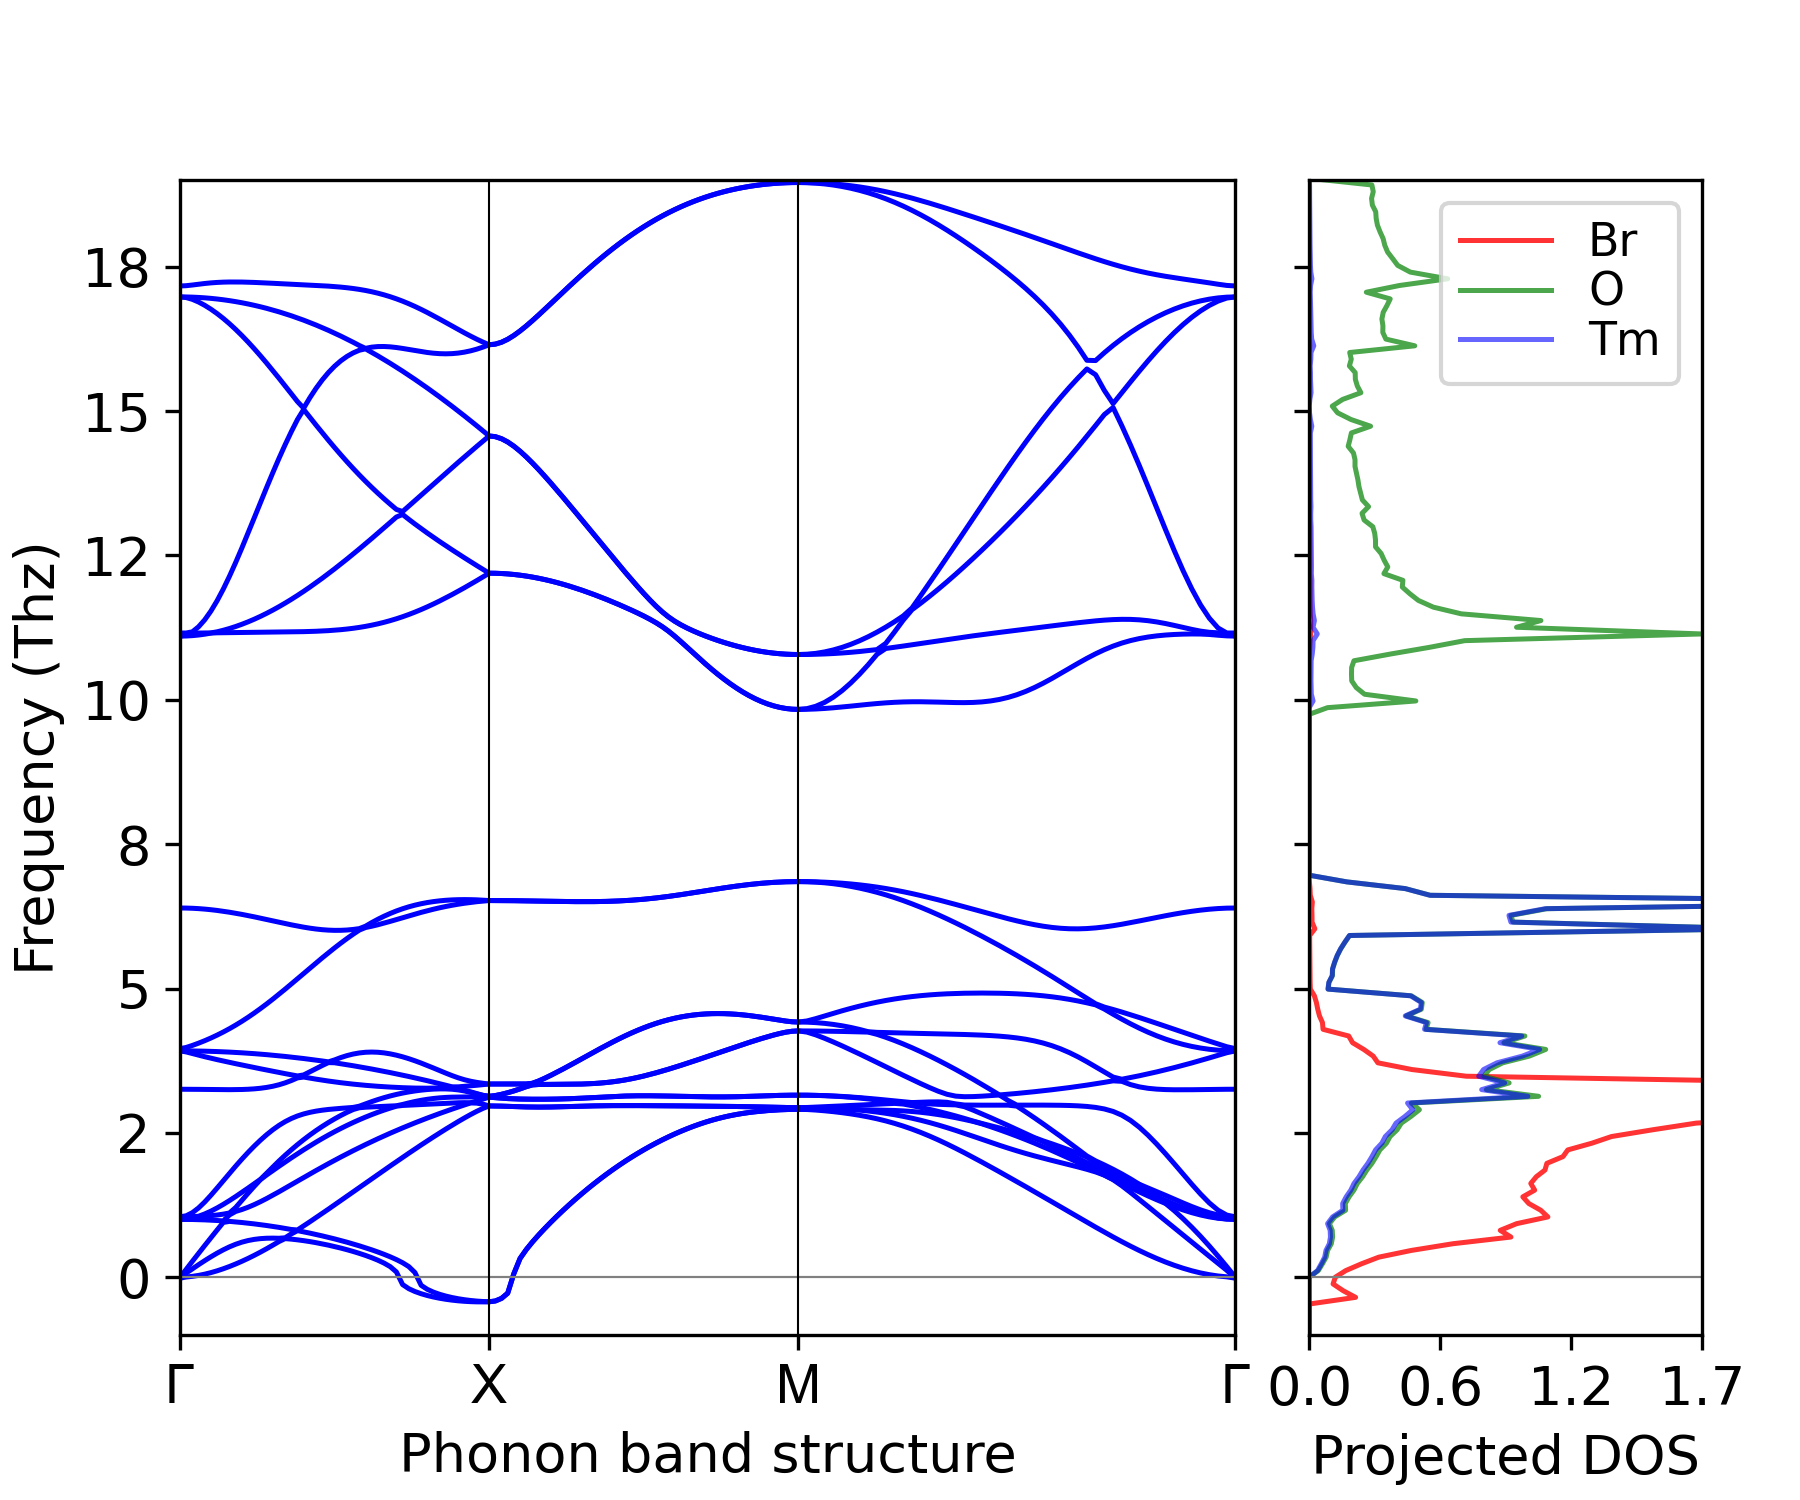 ../_images/phonon_BAND_LDOS-TmBrO_P4^nmm.png